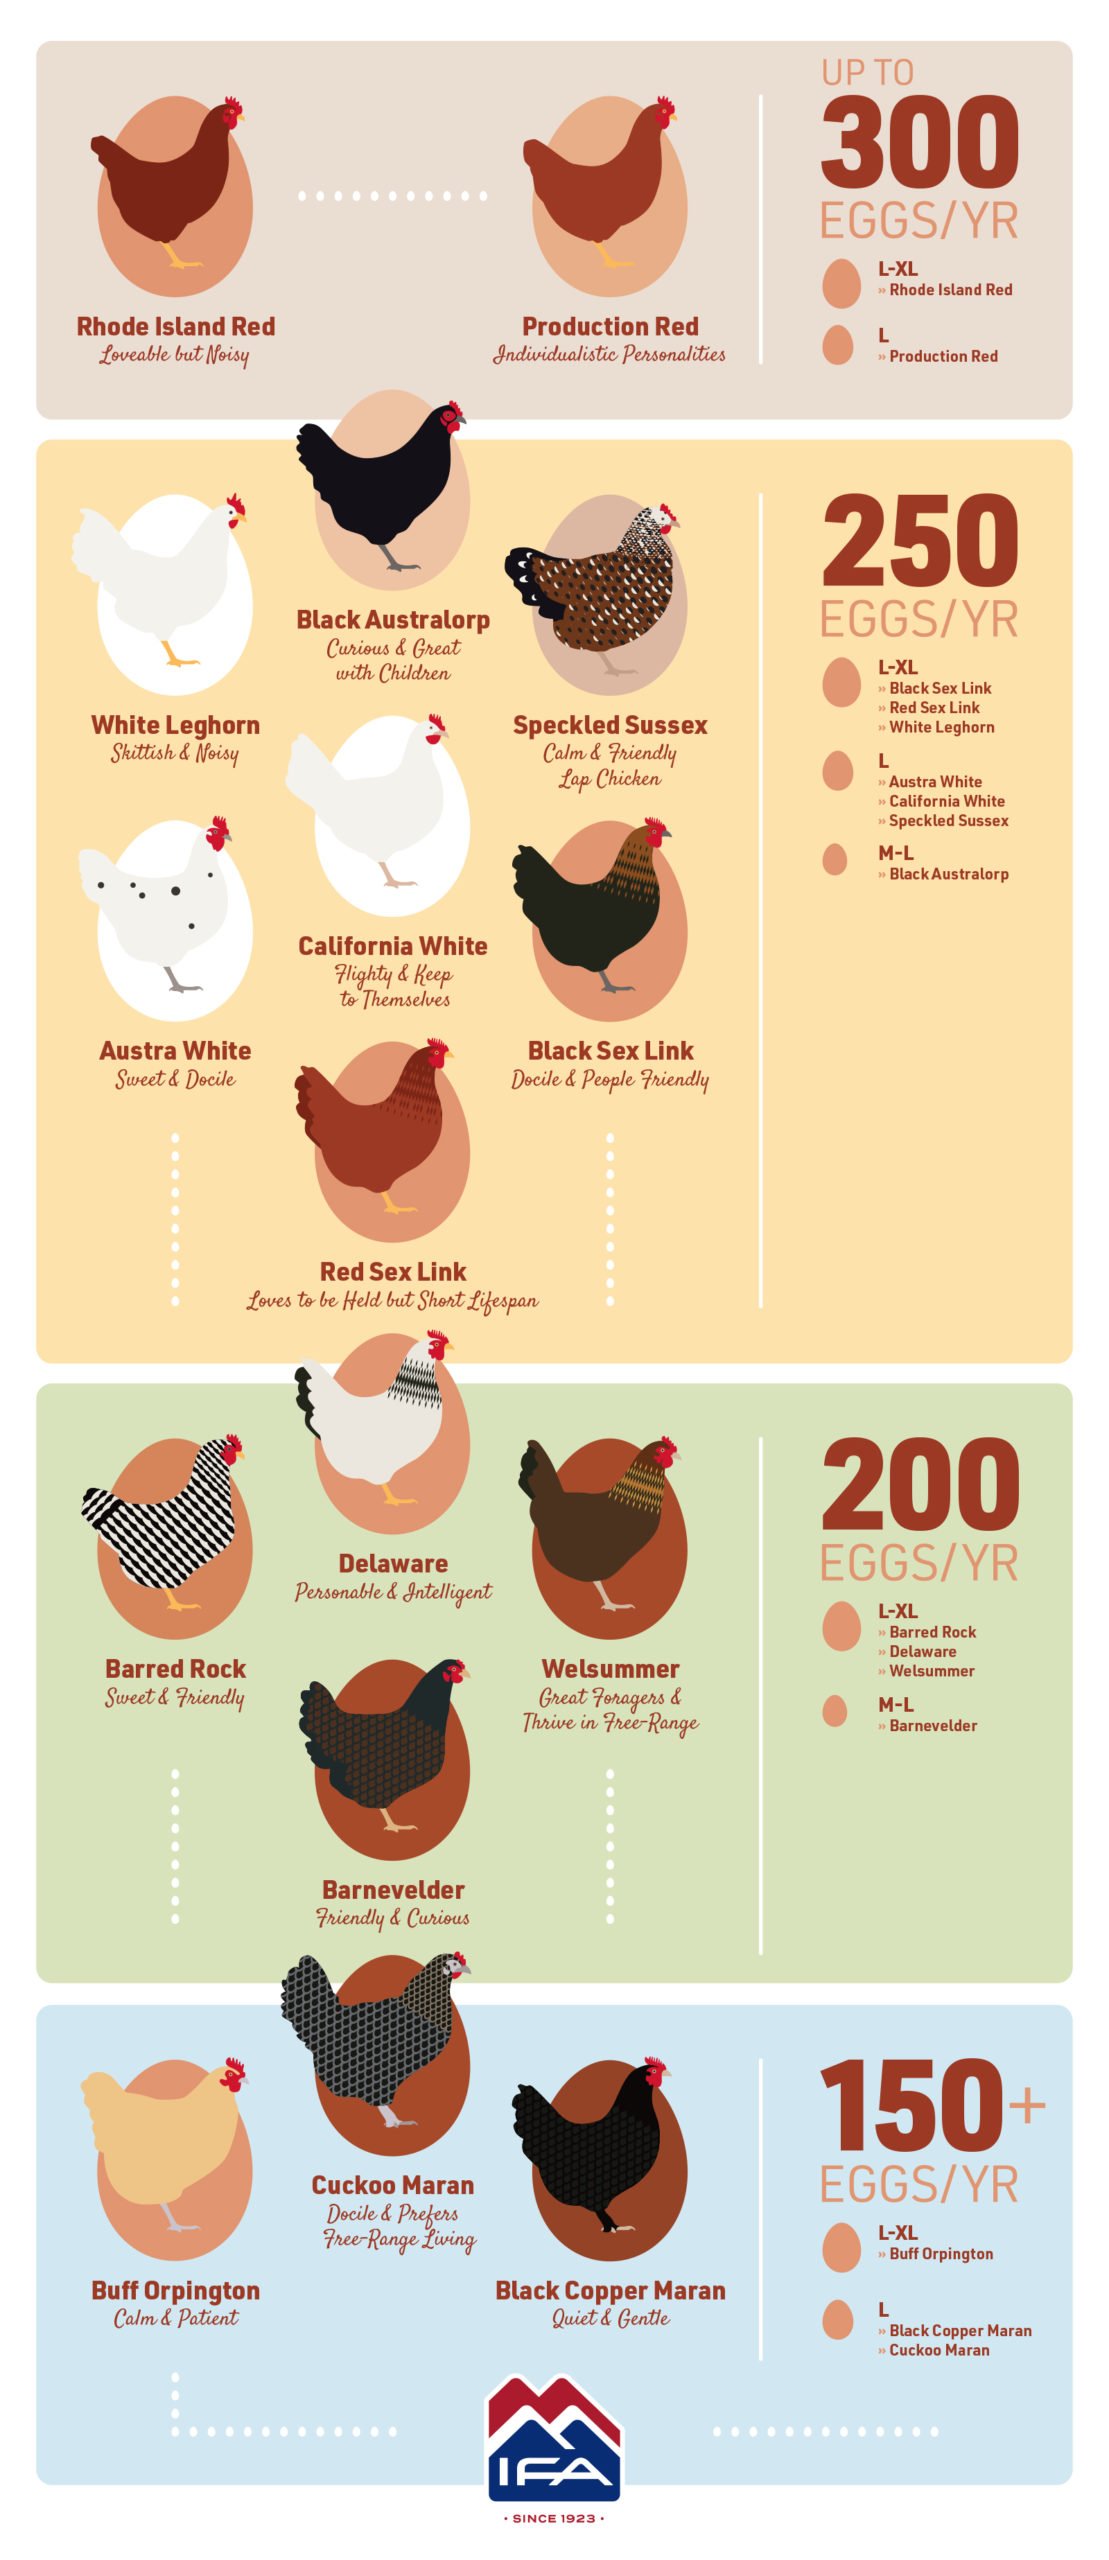 Egg Laying Chicken Breeds